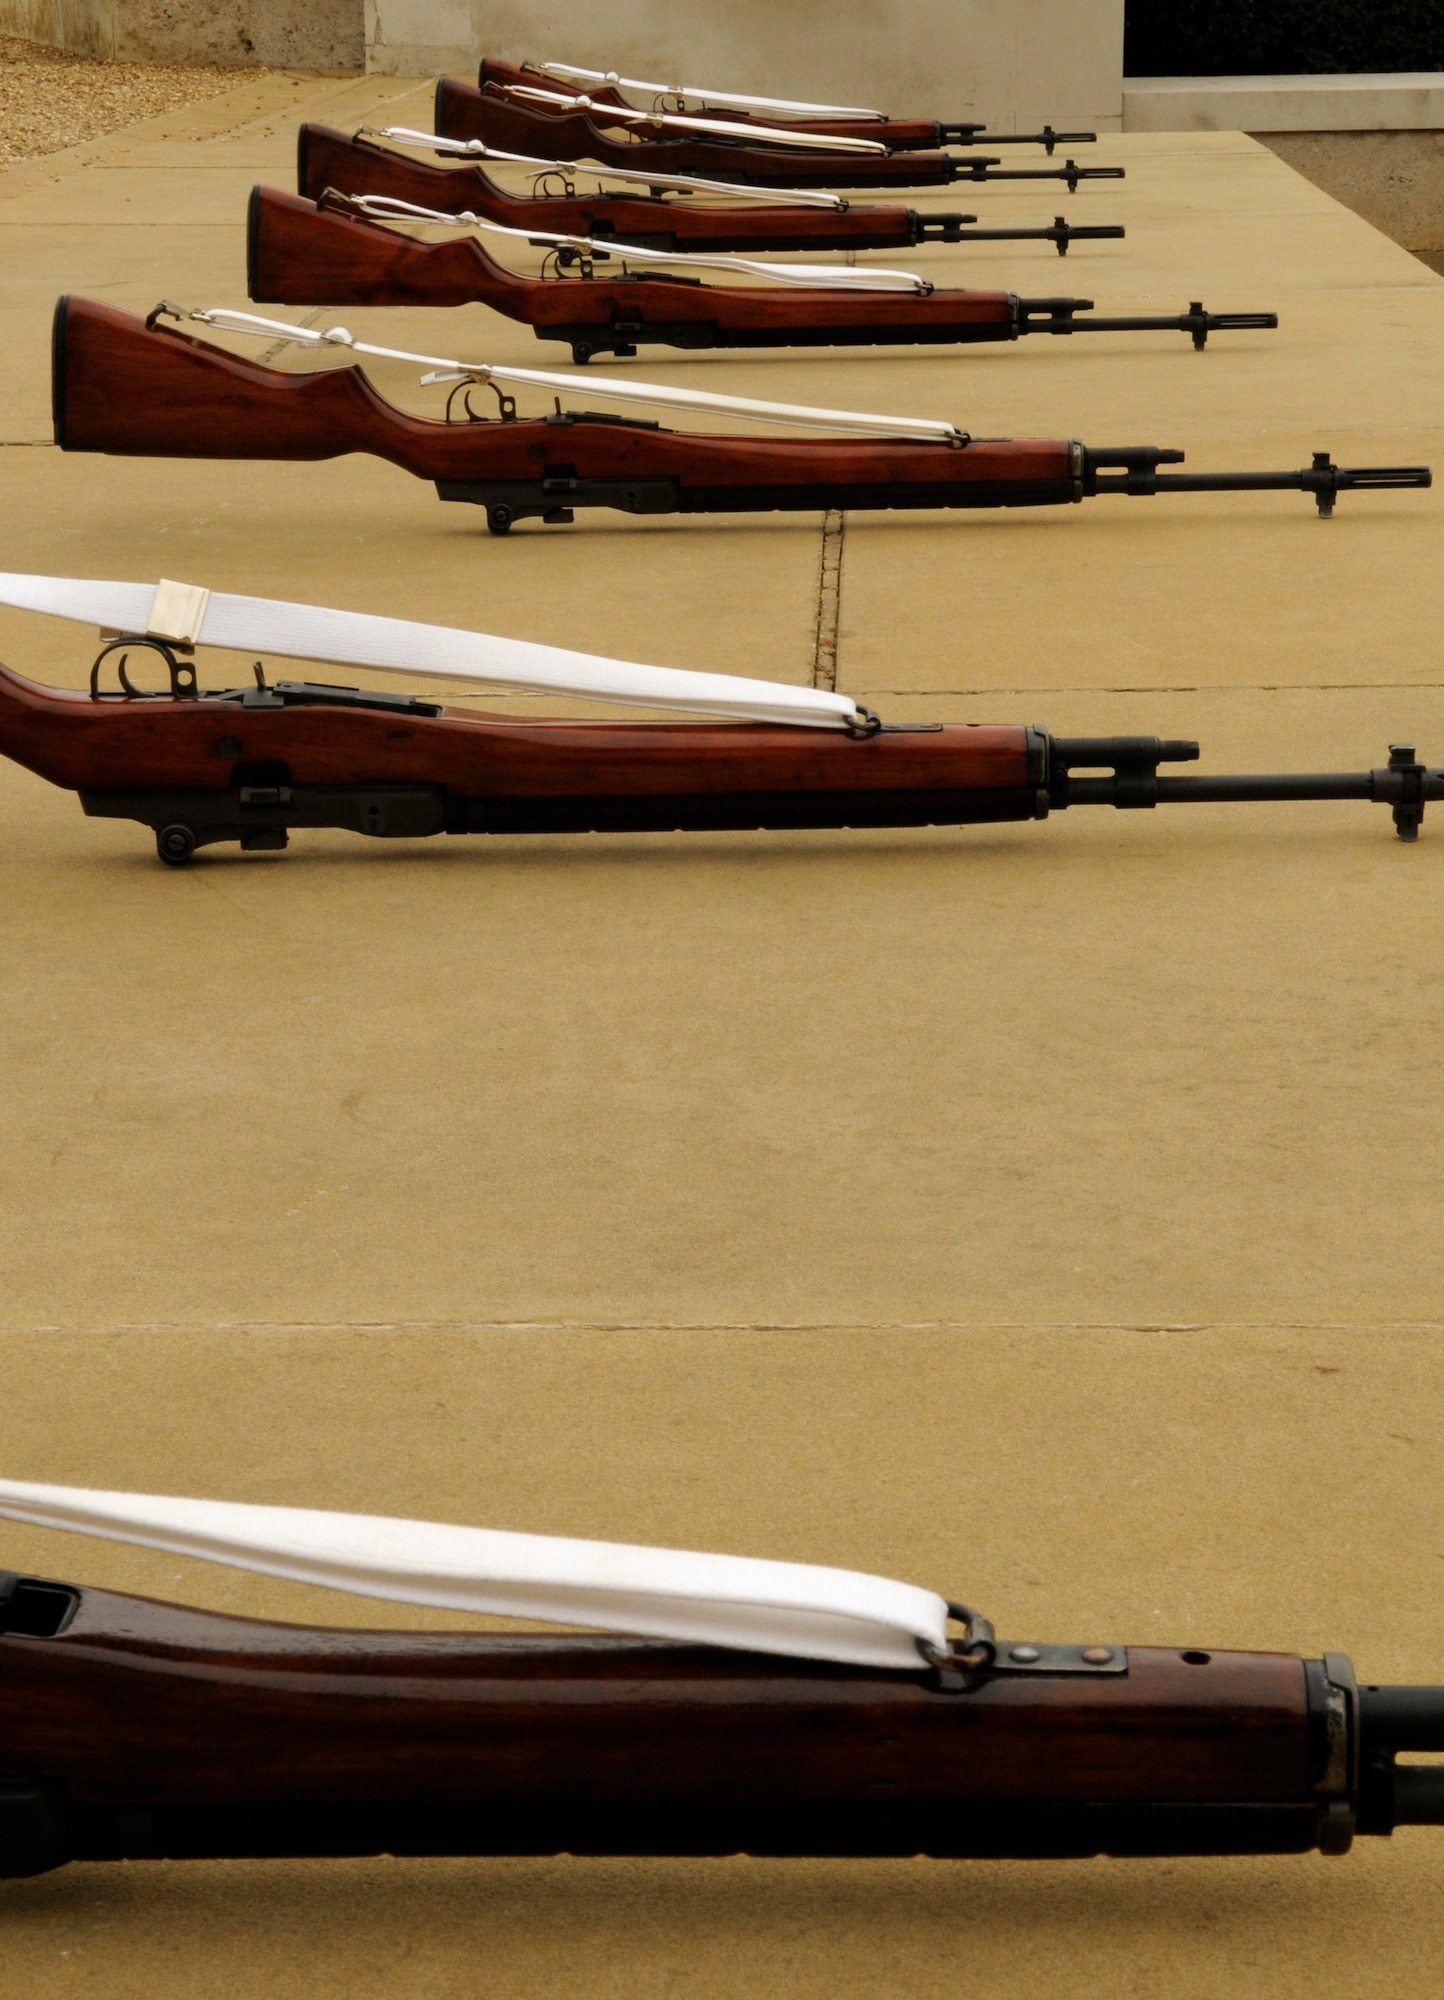 RAF MILDENHALL, England – Honor Guard rifles lay in line prepared for a 21-gun salute at Madingley Memorial Cemetery on Memorial Day, May 25, 2009.  The salute is to honor the thousands of U.S. war veterans laid to rest in England.  (U.S. Air Force file photo)